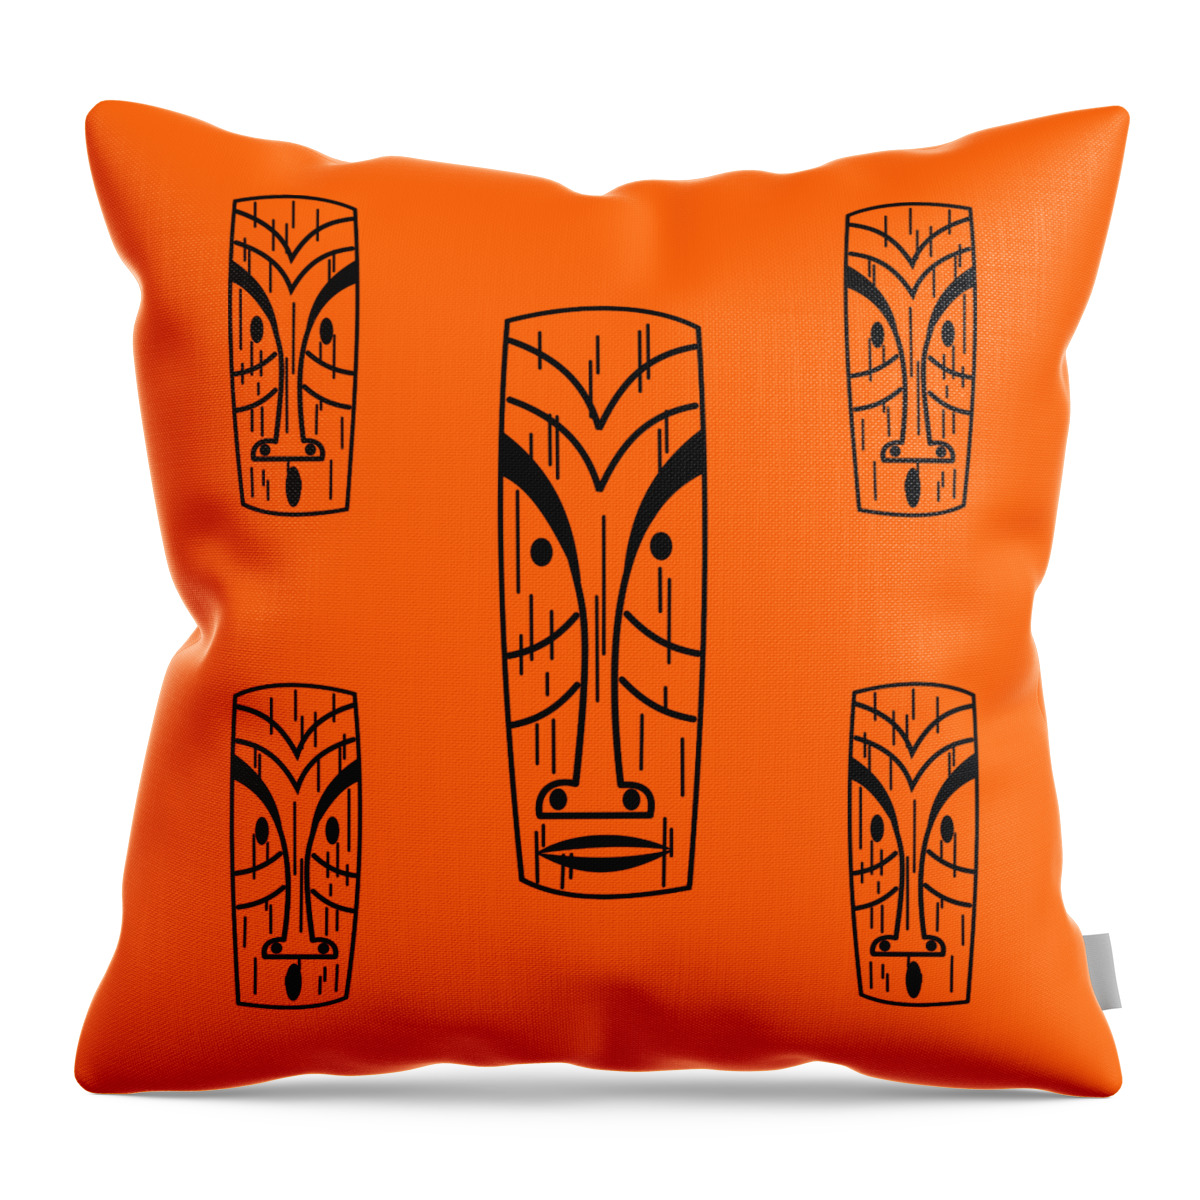 Mid Century Modern Throw Pillow featuring the digital art Tikis by Donna Mibus